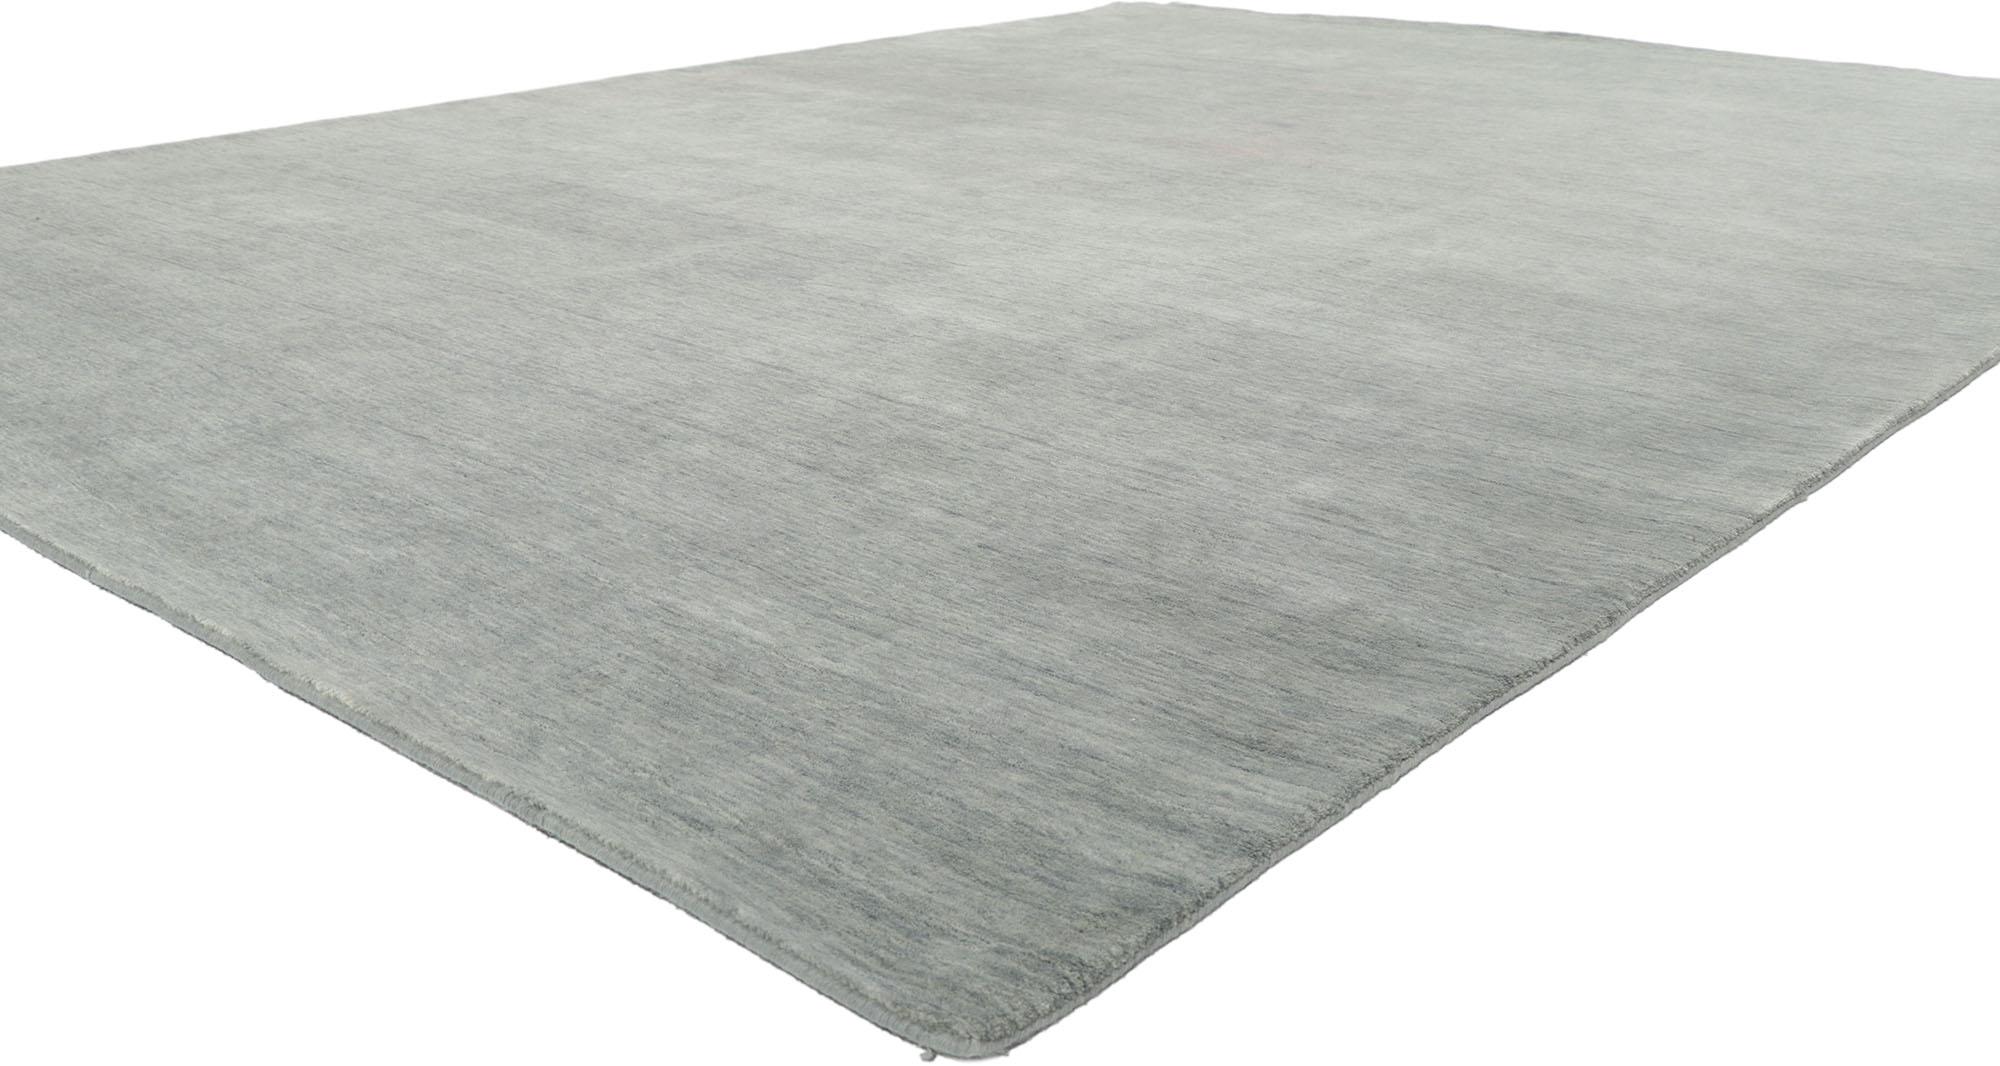 30744 New Contemporary Gray Area Rug with Modern Style 09'01 x 12'00. Effortless beauty combined with simplicity and modern style, this hand-loom wool contemporary Indian rug provides a feeling of cozy contentment without the clutter. Imbued with